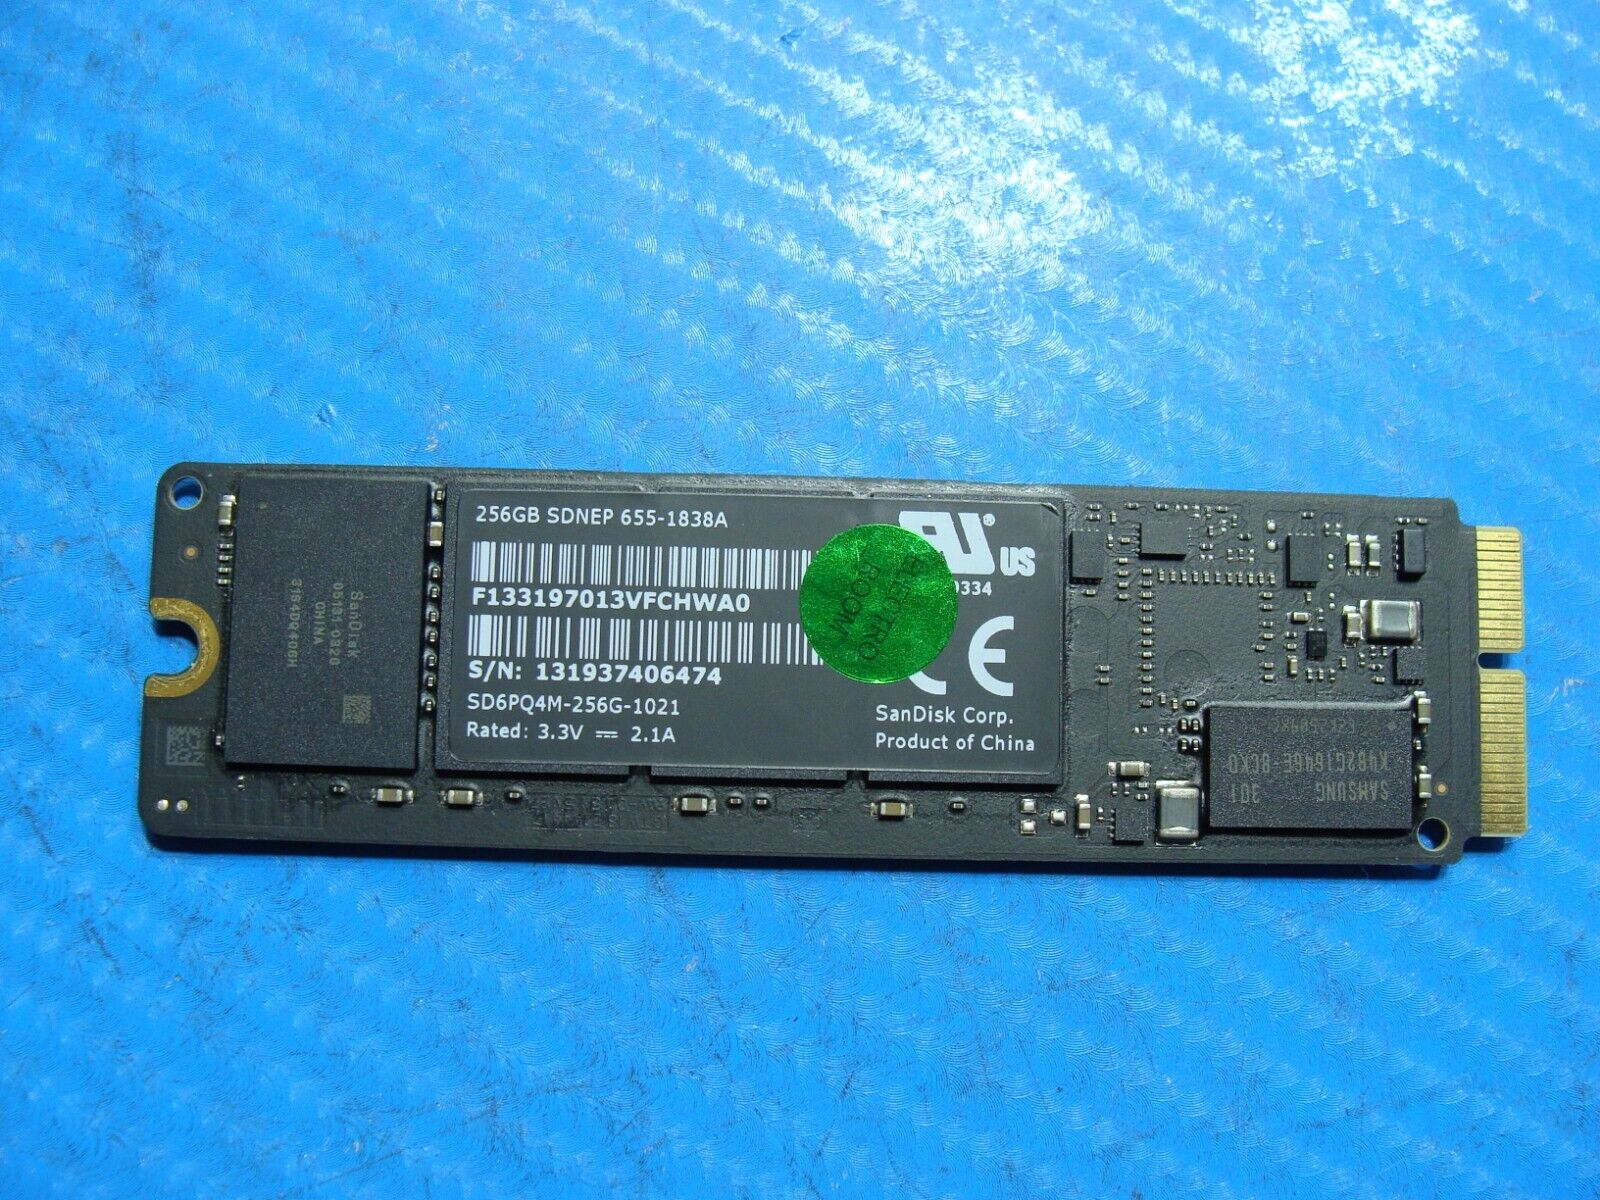 MacBook A1465 SanDisk 256Gb SSD Solid State Drive 655-1838A SD6PQ4M-256G-1021